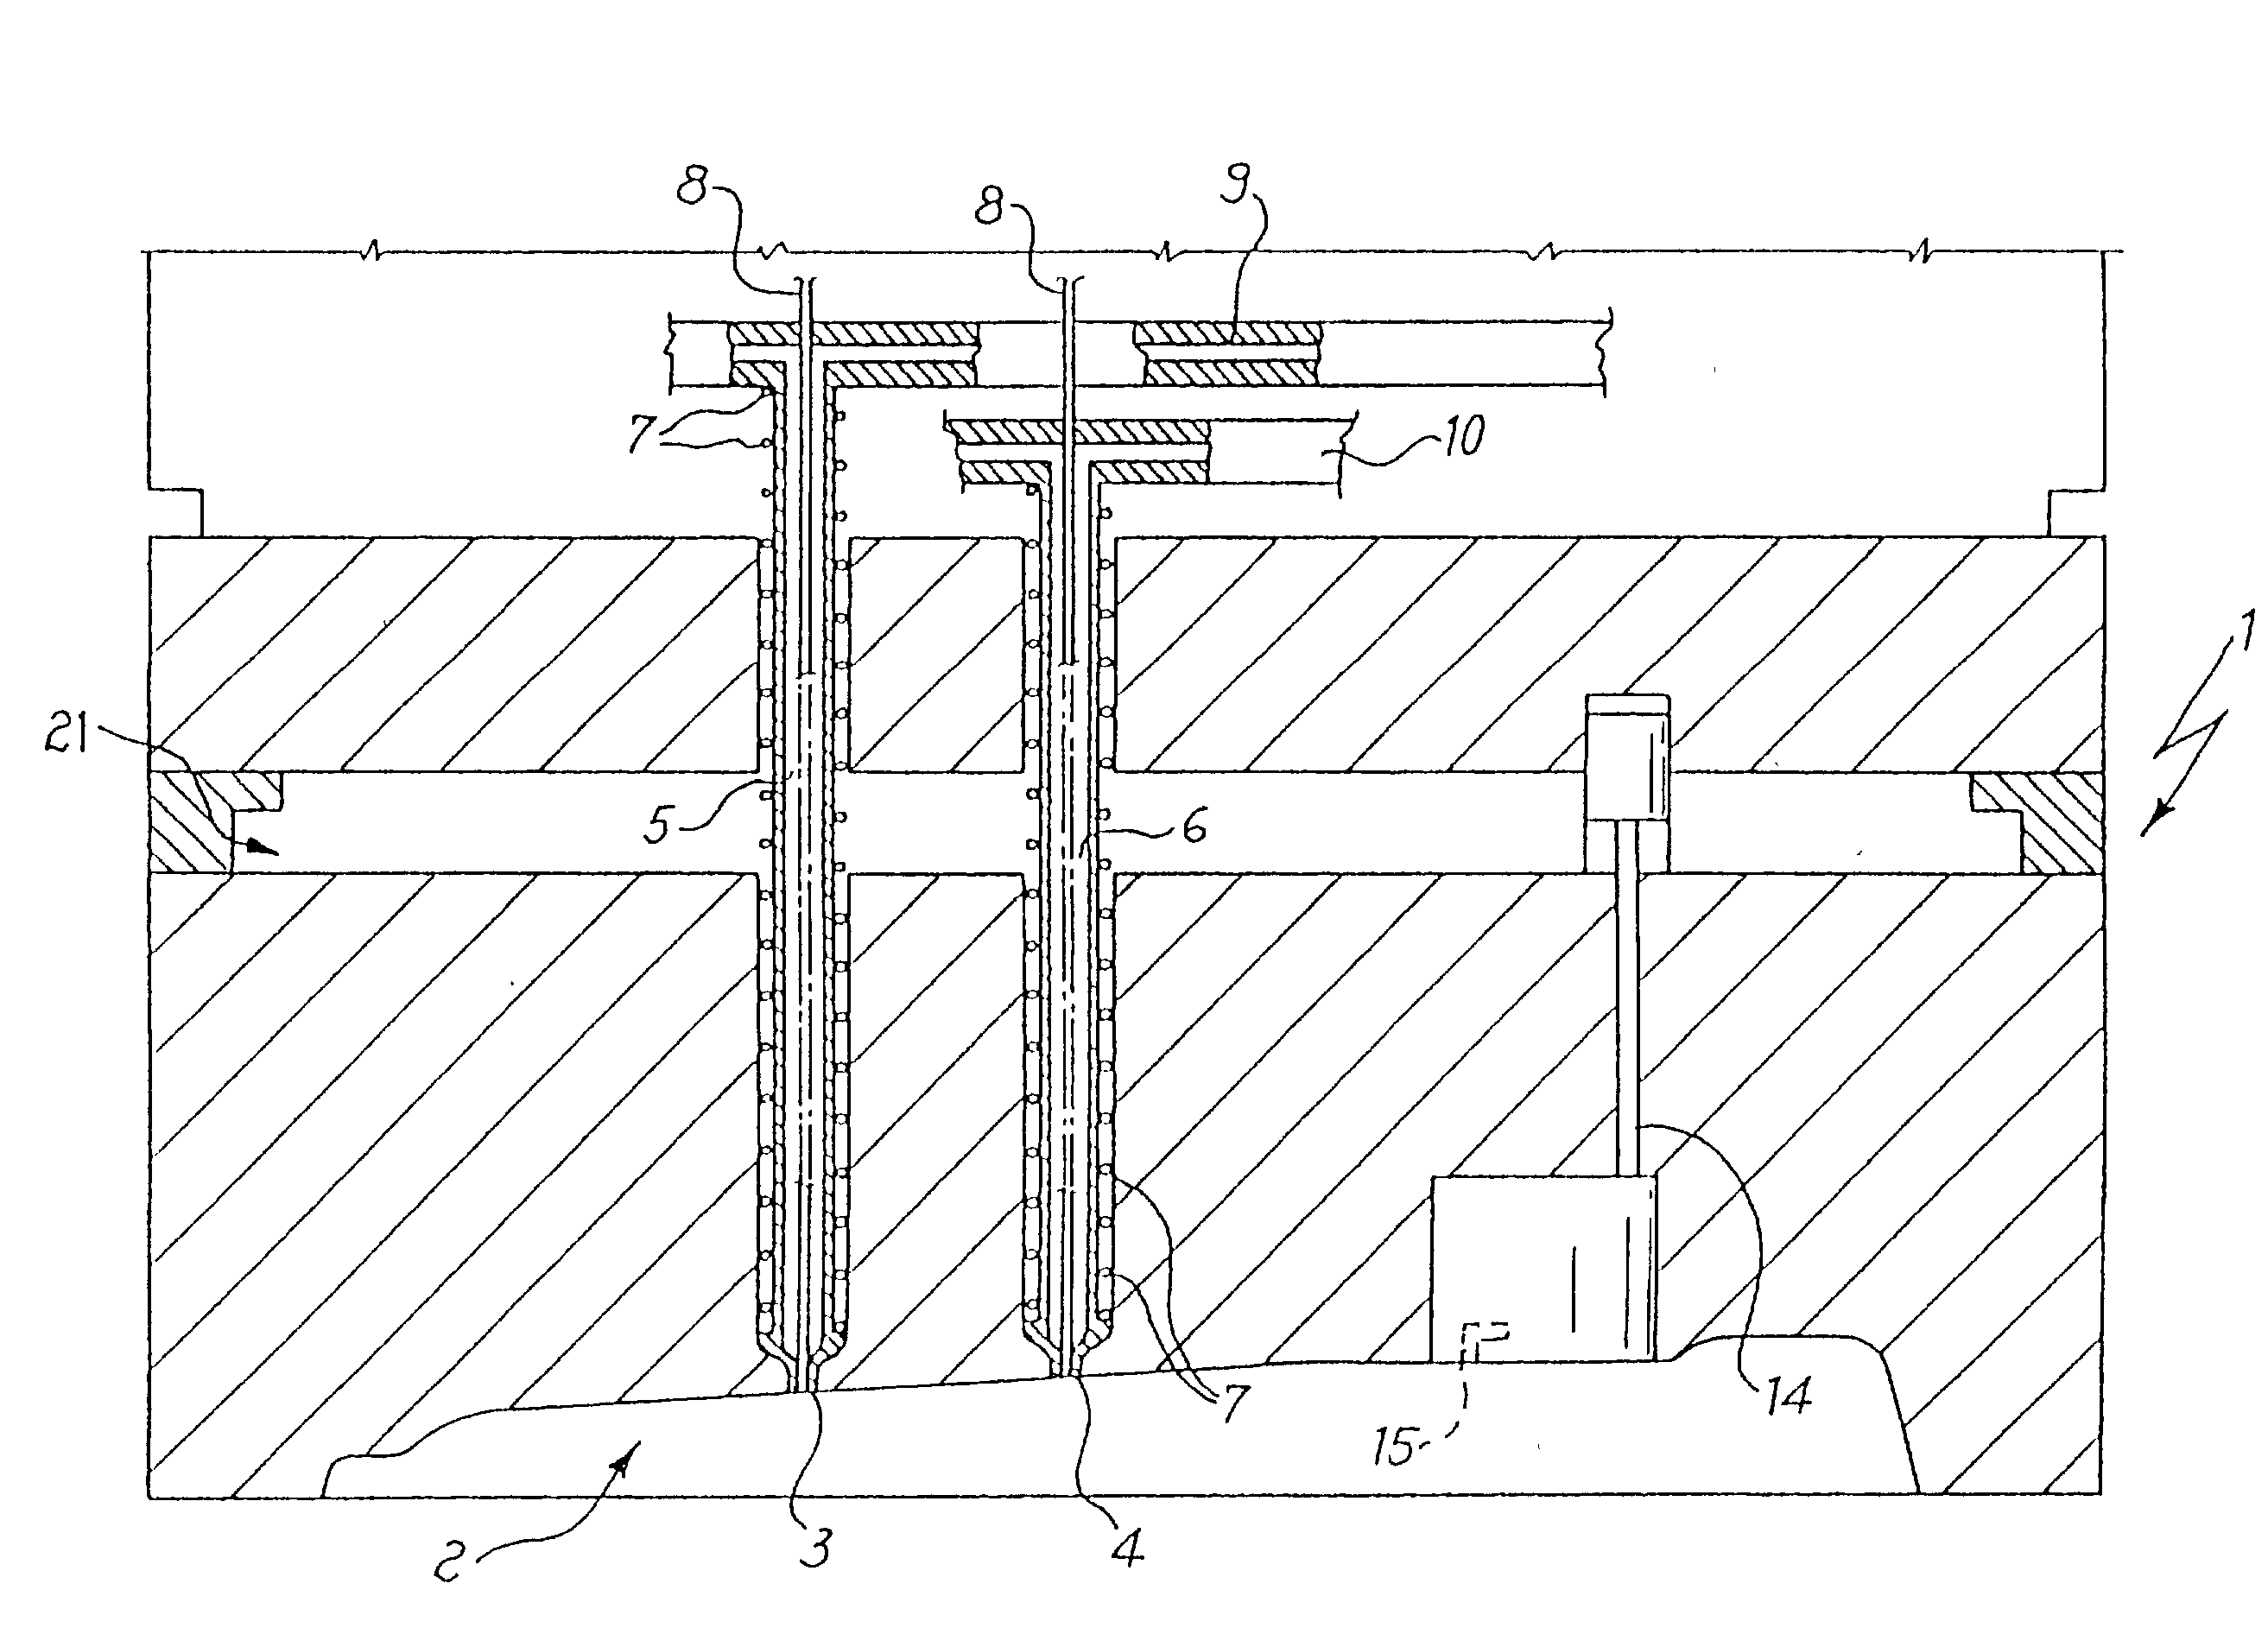 Process and device for coinjection molding multilayer products